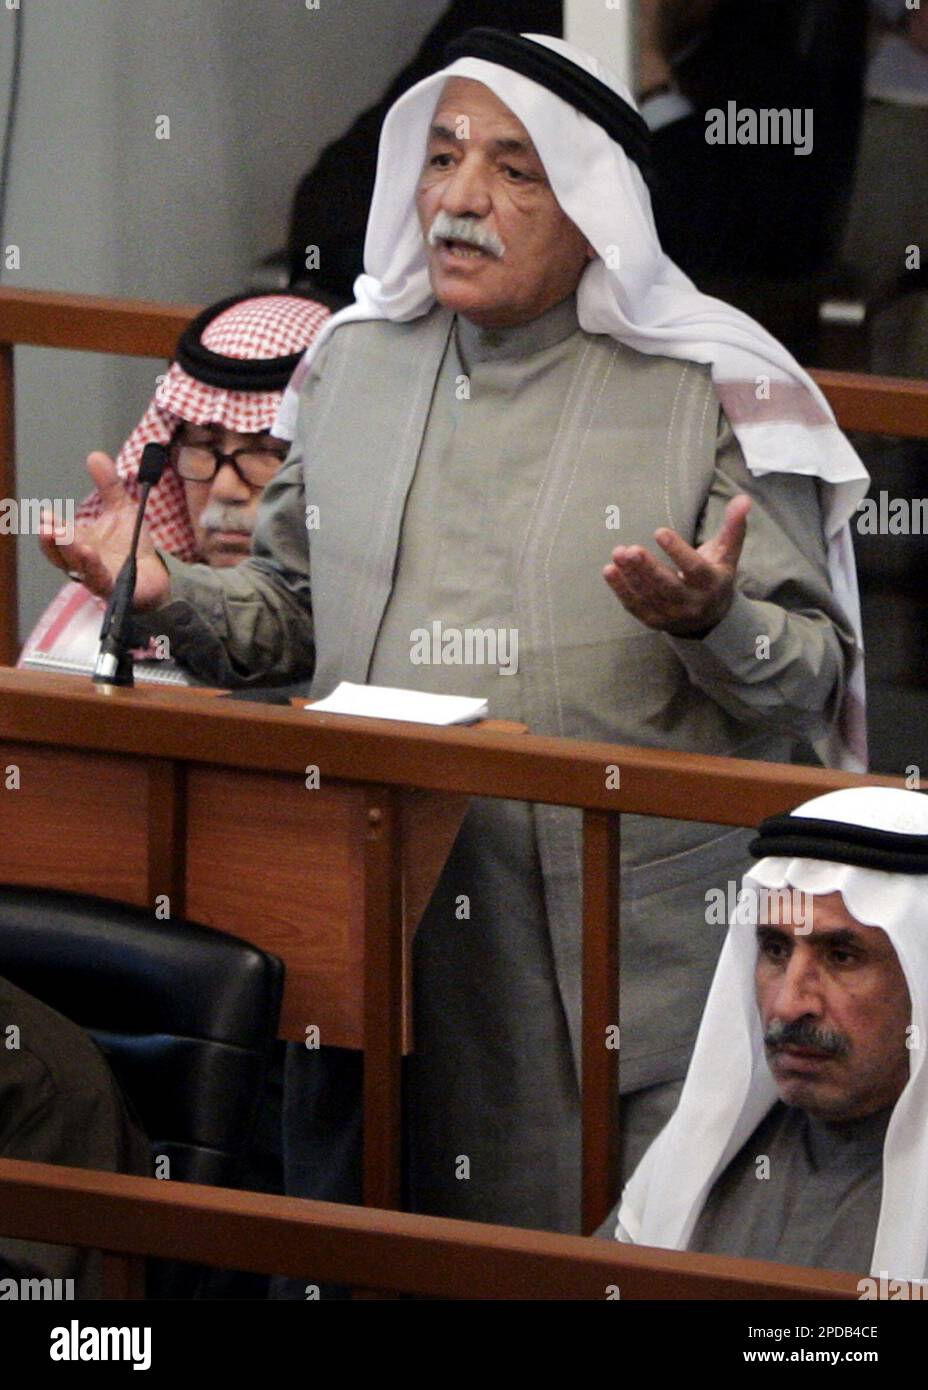 Former Iraqi Vice President Taha Yassin Ramadan speaks to the court during the trial of Saddam Hussein in Baghdad Wednesday March 1, 2006